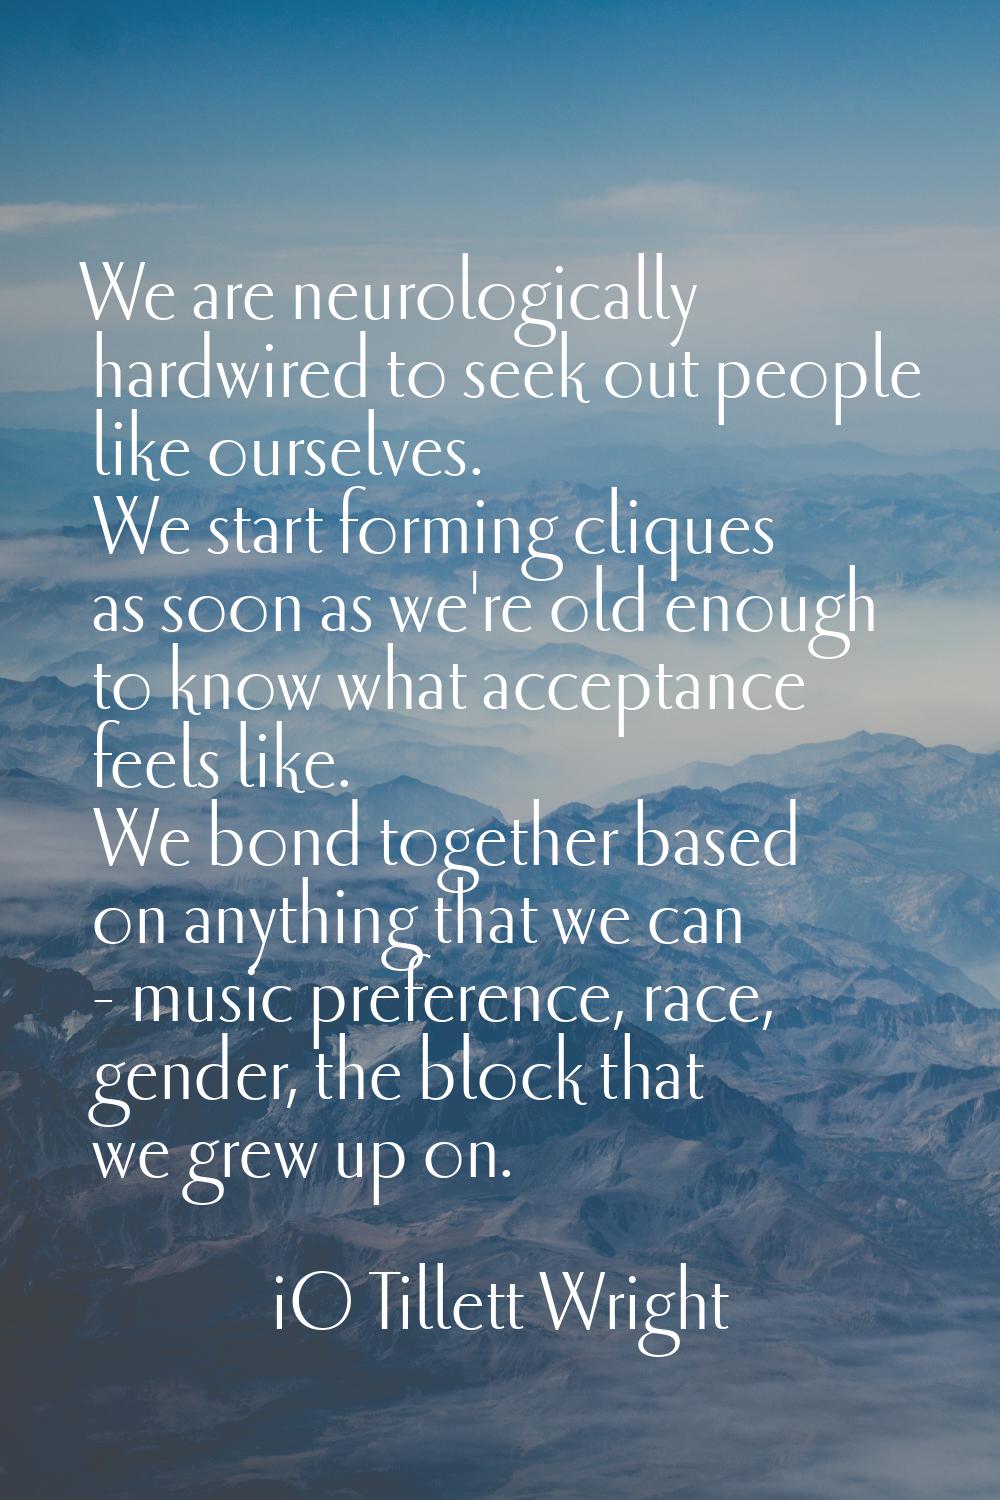 We are neurologically hardwired to seek out people like ourselves. We start forming cliques as soon